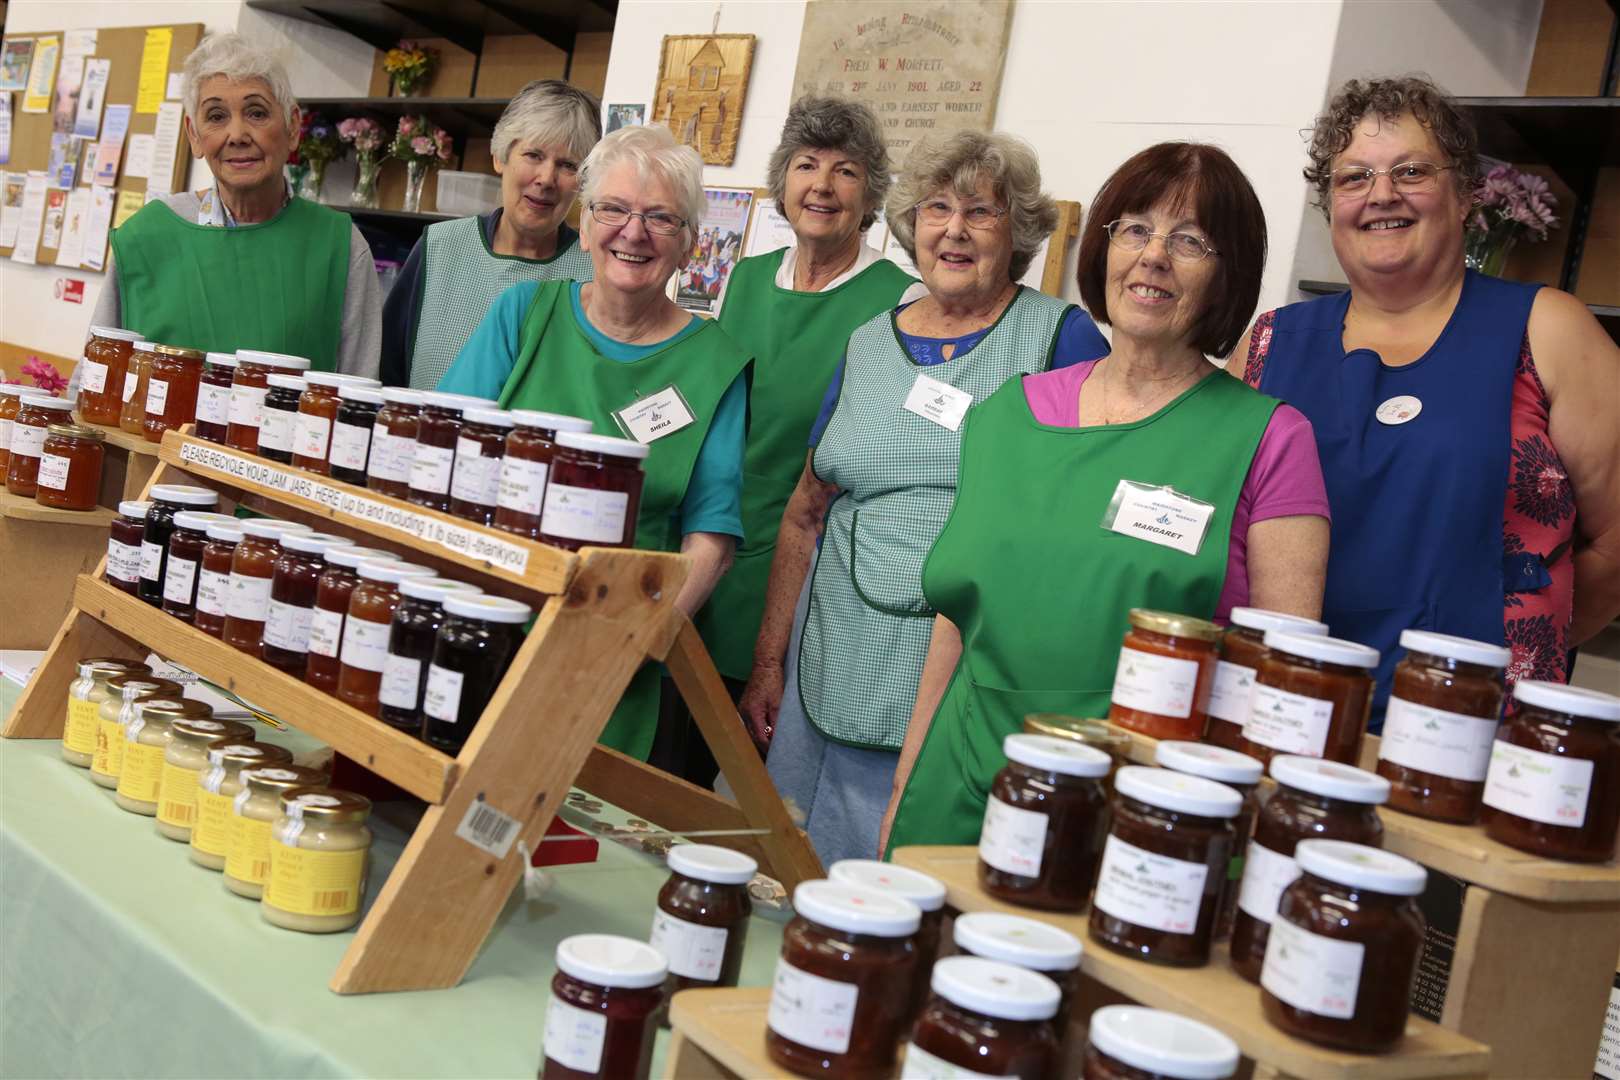 The Maidstone Country Market celebrates its 70th anniversary